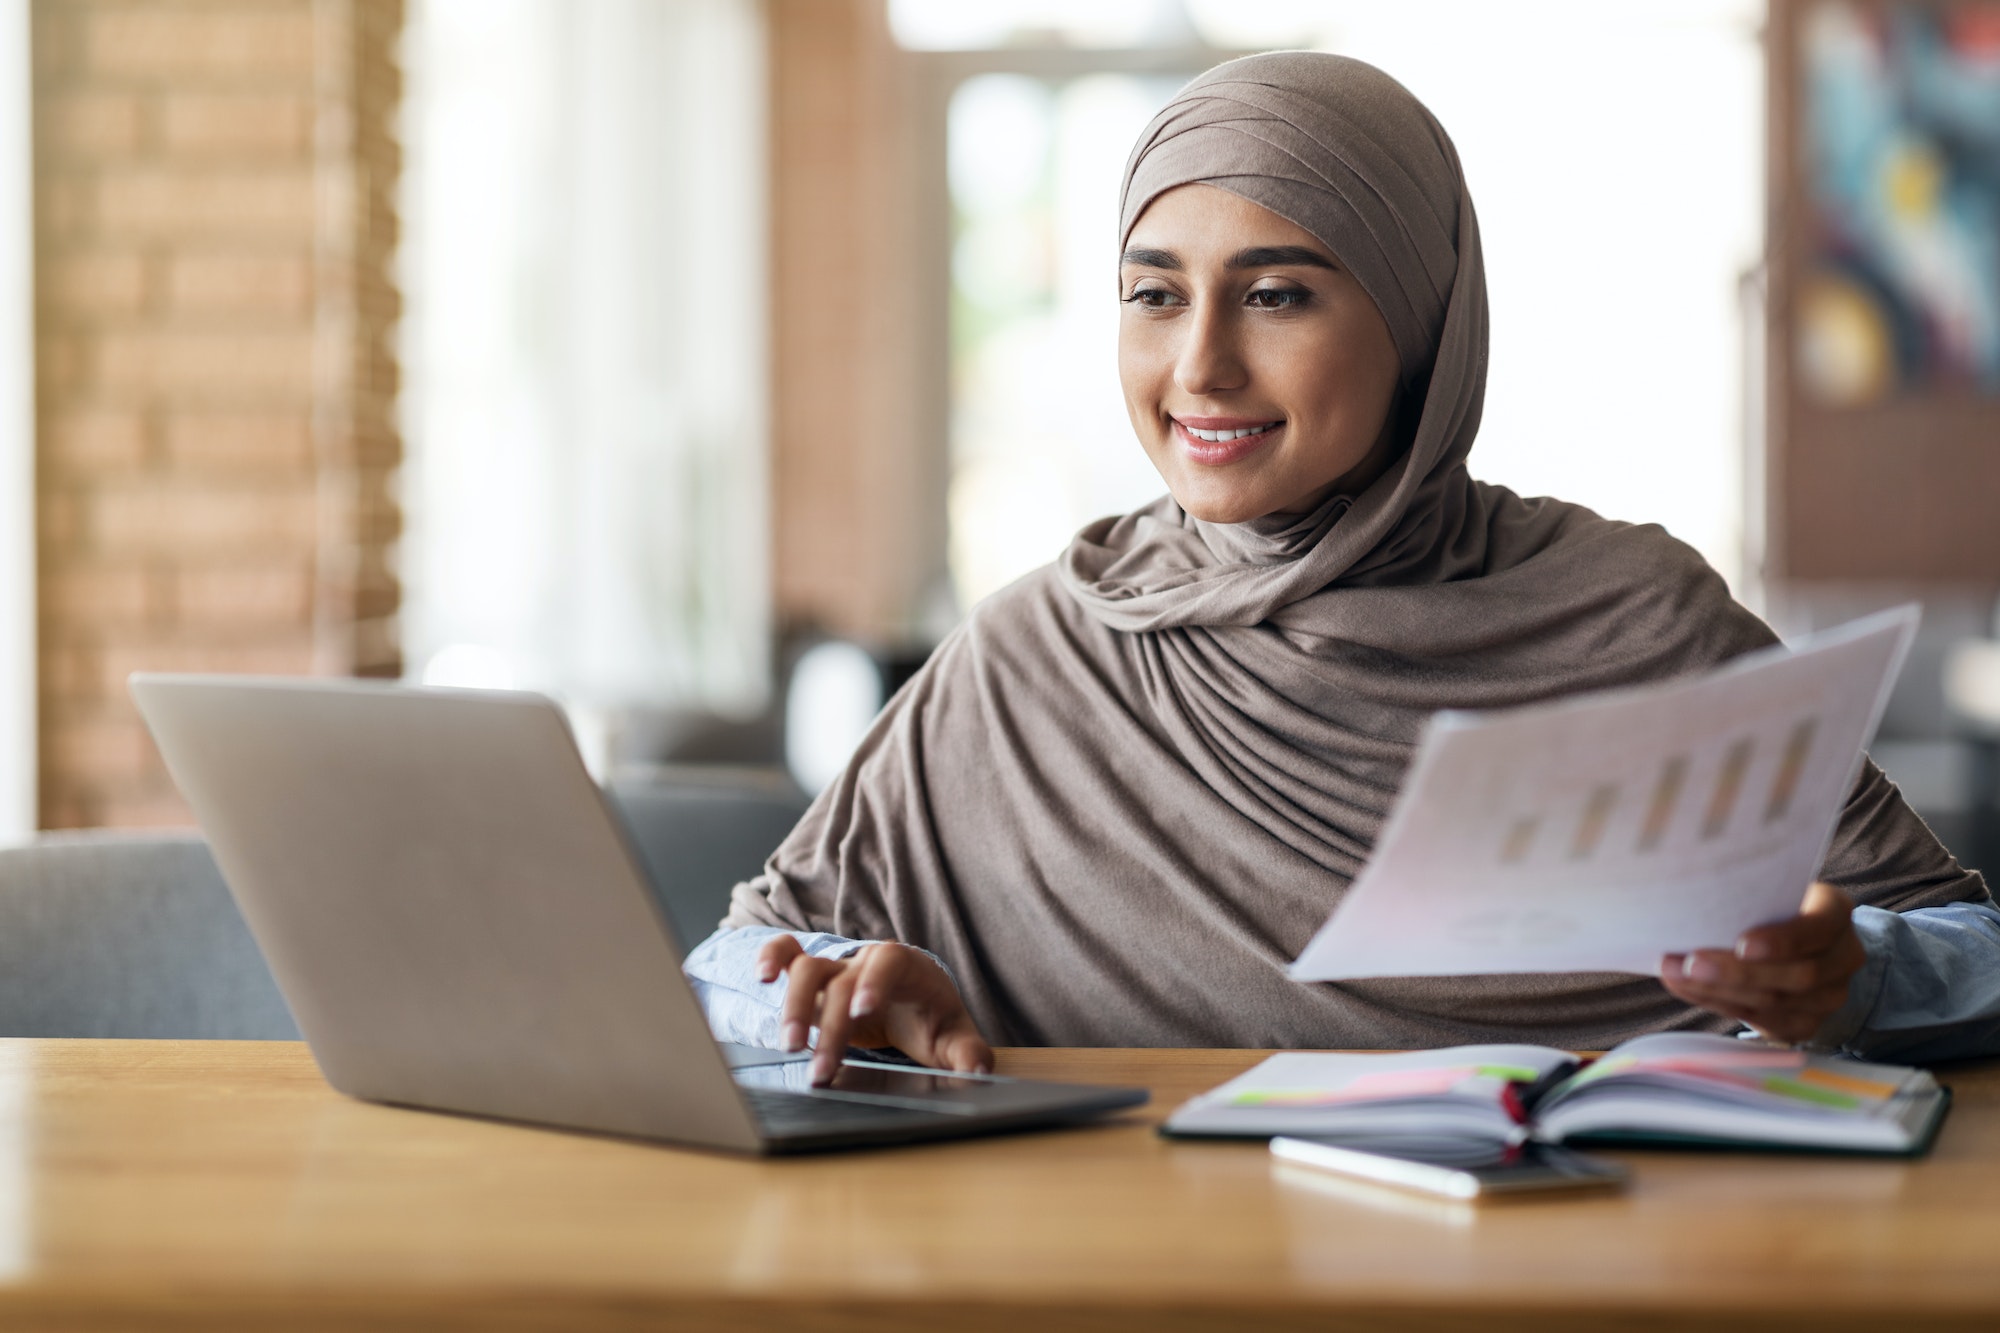 Muslim woman business analyst working on laptop at cafe